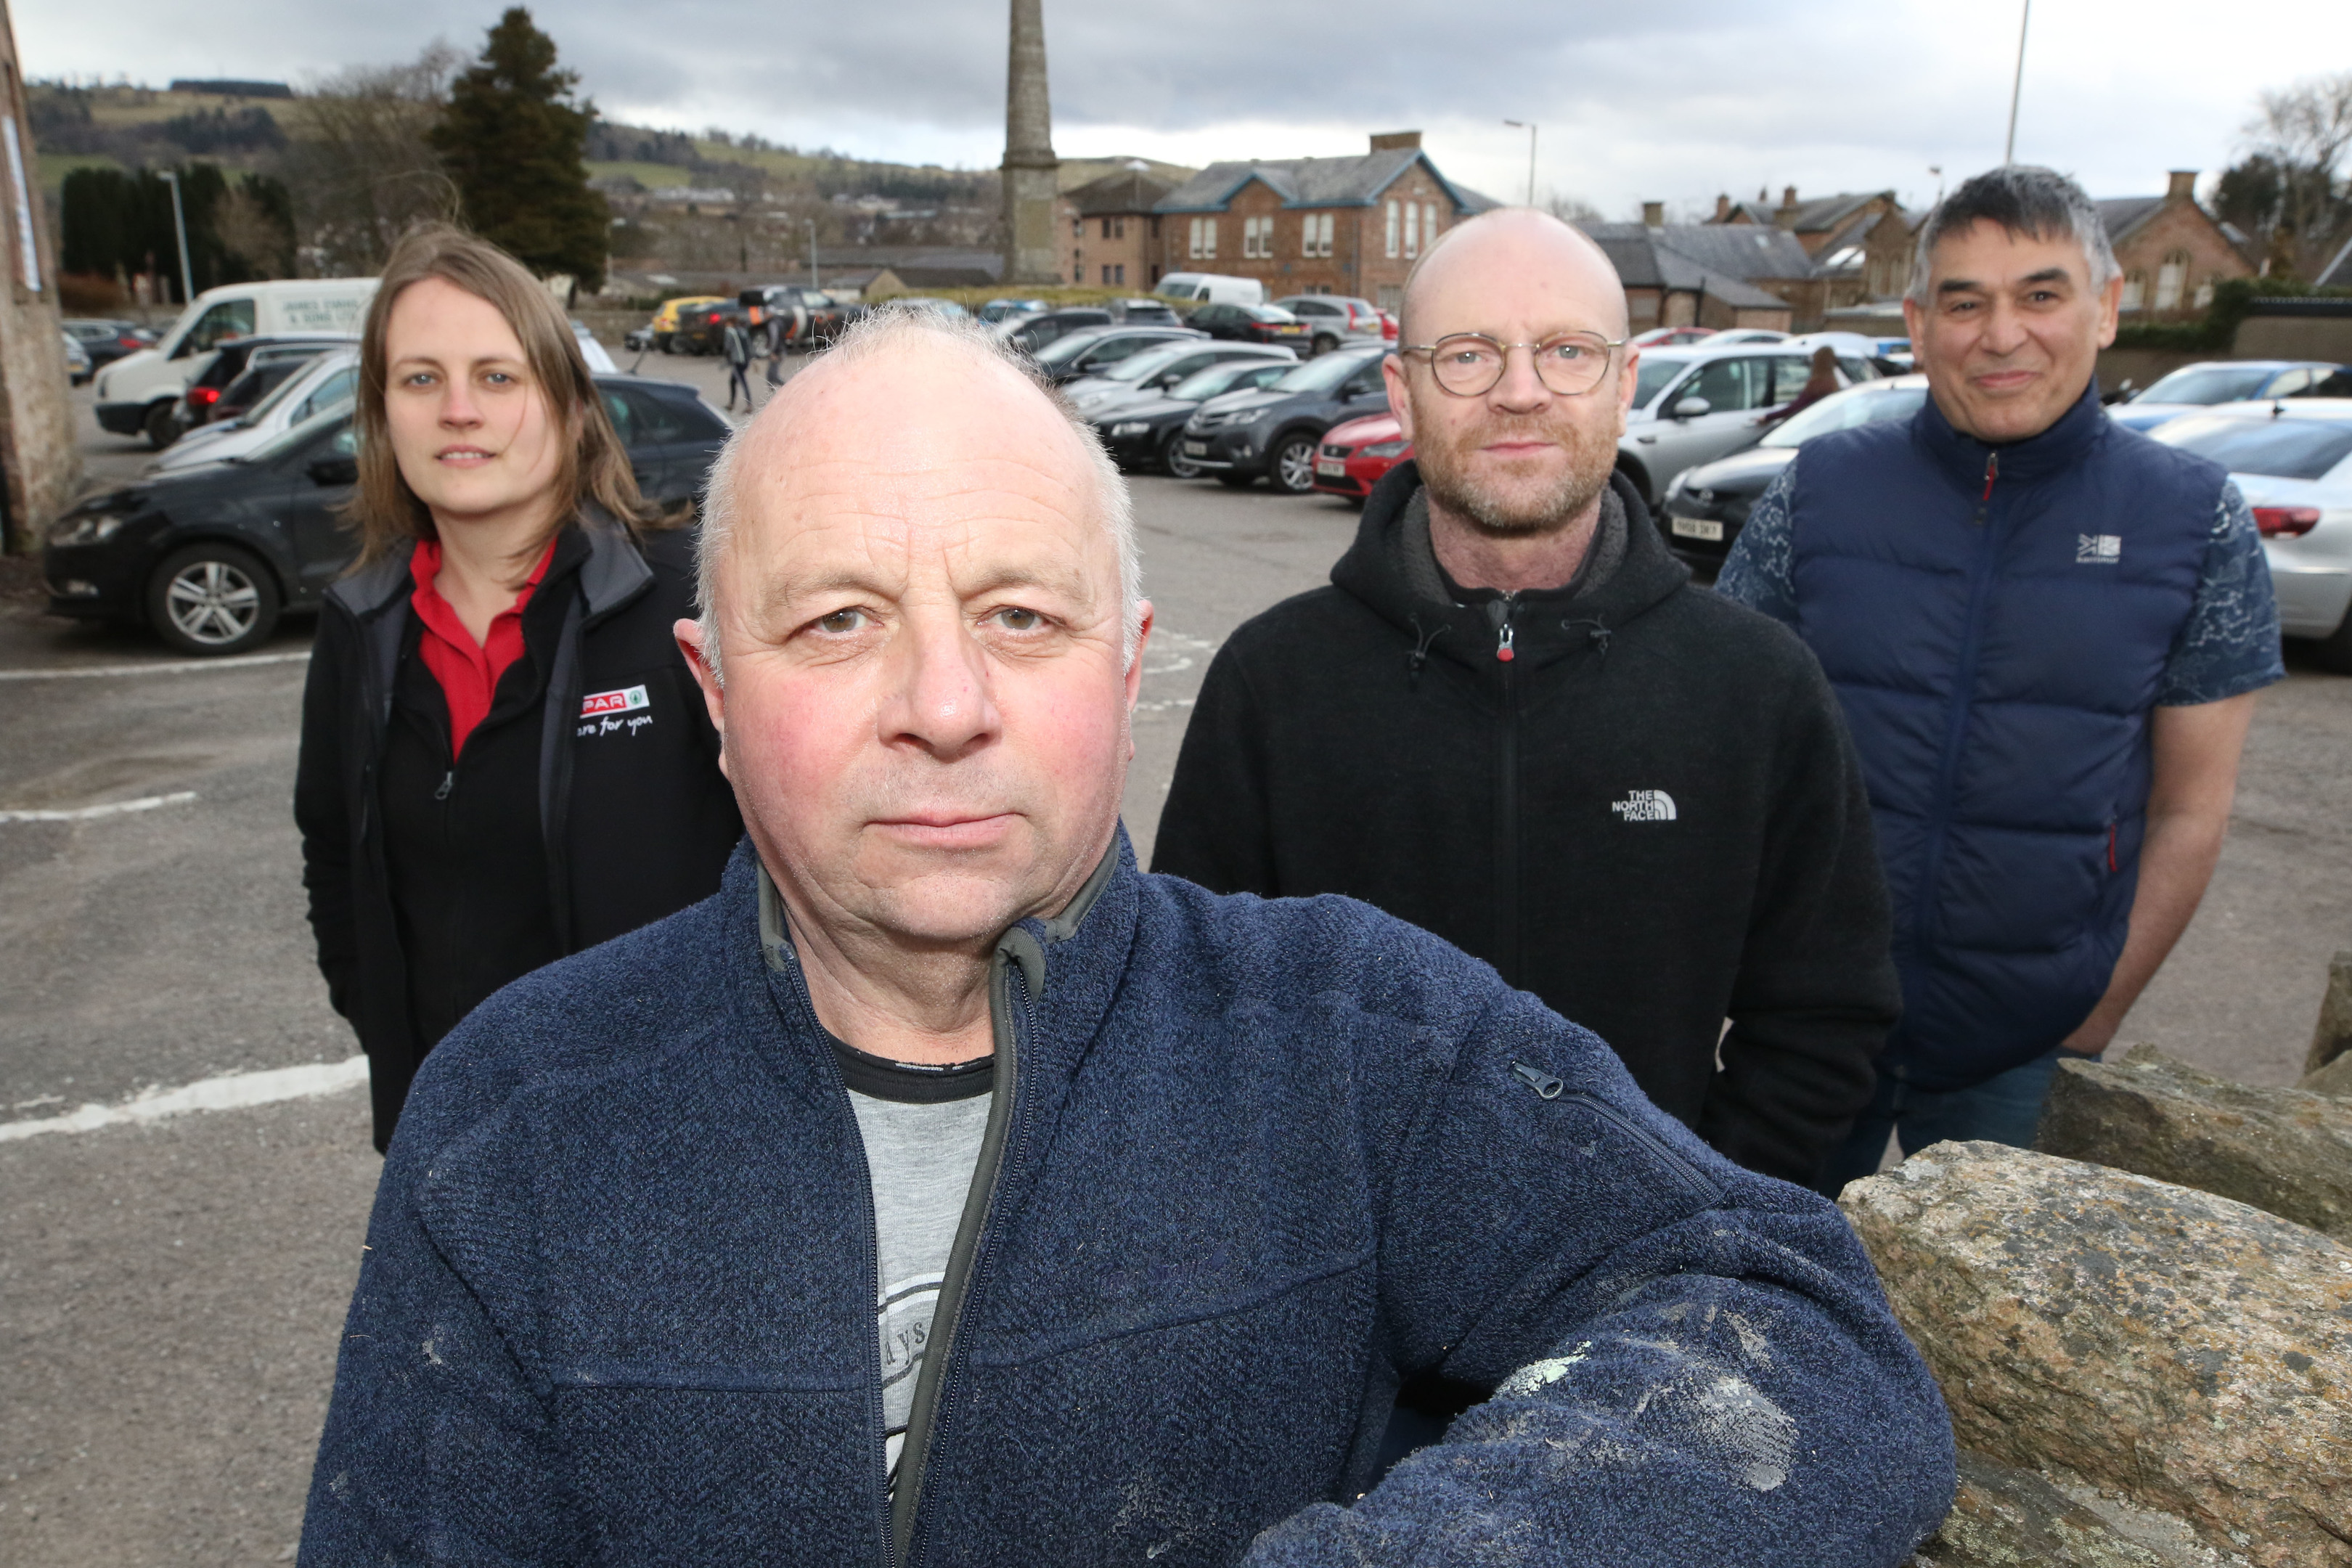 Local business owners in Dingwall are protesting against the proposed introduction of parking charges at the town's Cromarty Car Park. Left-to-right: Alicen Lawrie (correct), David Campbell, Graeme Dolier, Saeed Shirvani.